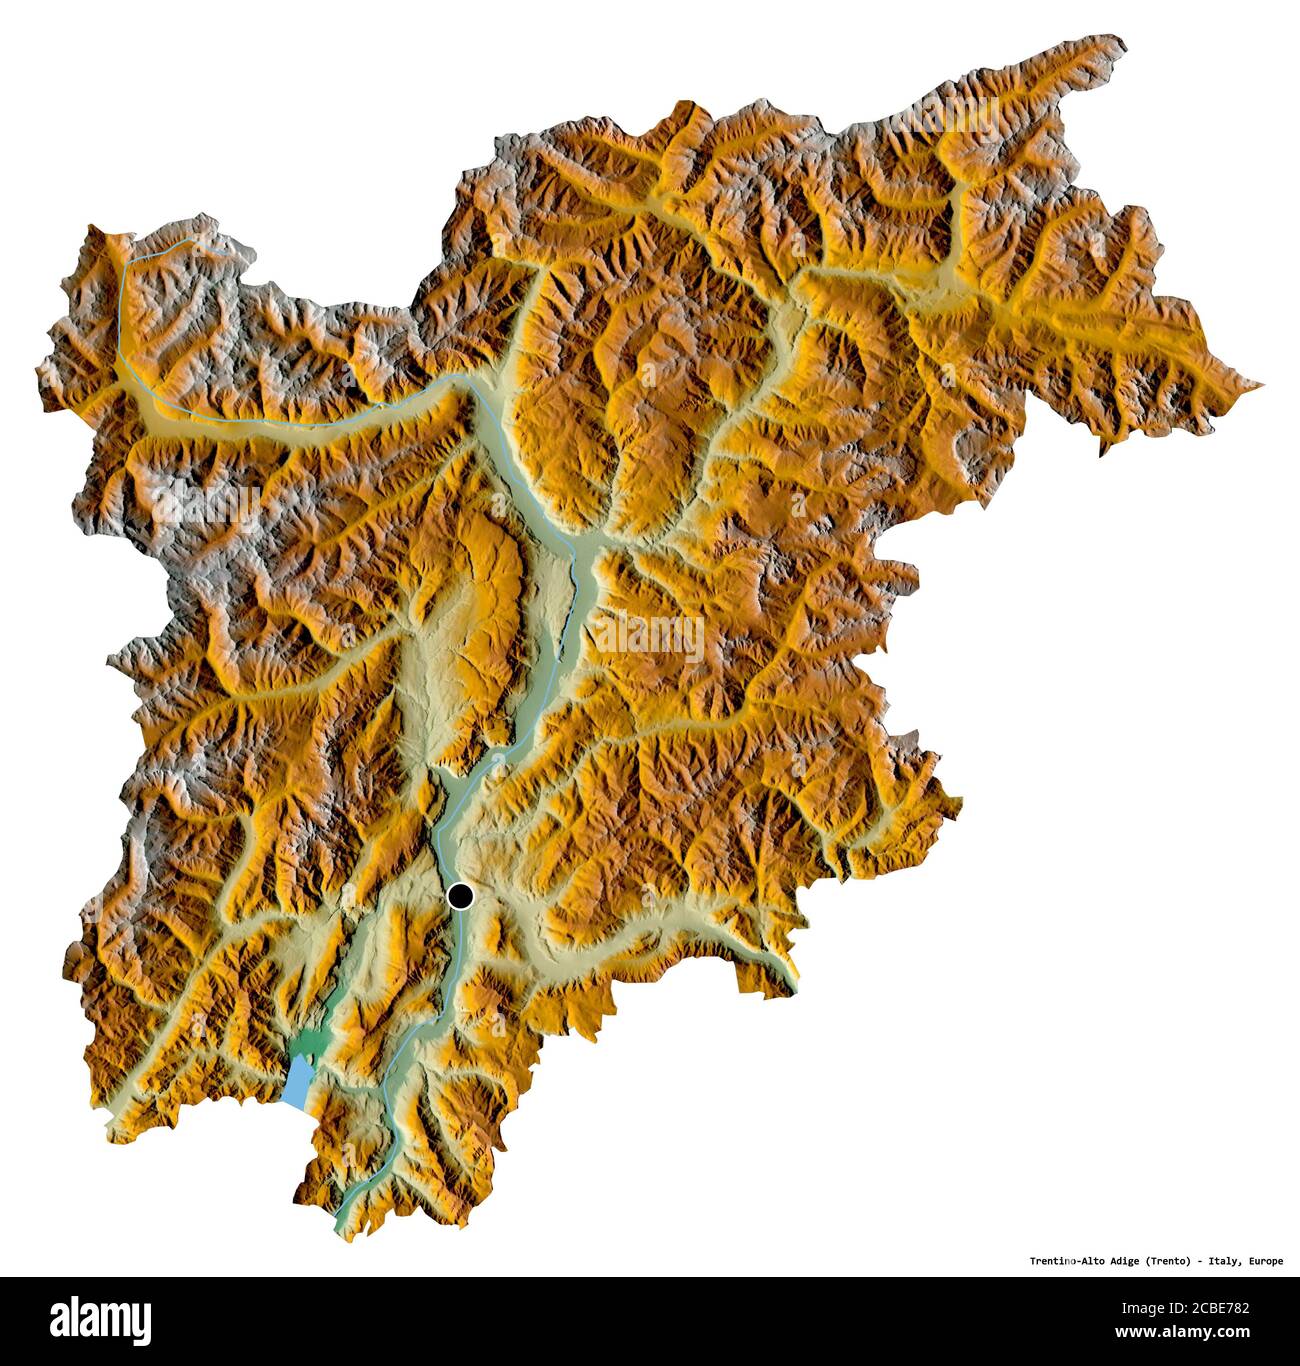 Shape of Trentino-Alto Adige, autonomous region of Italy, with its capital isolated on white background. Topographic relief map. 3D rendering Stock Photo